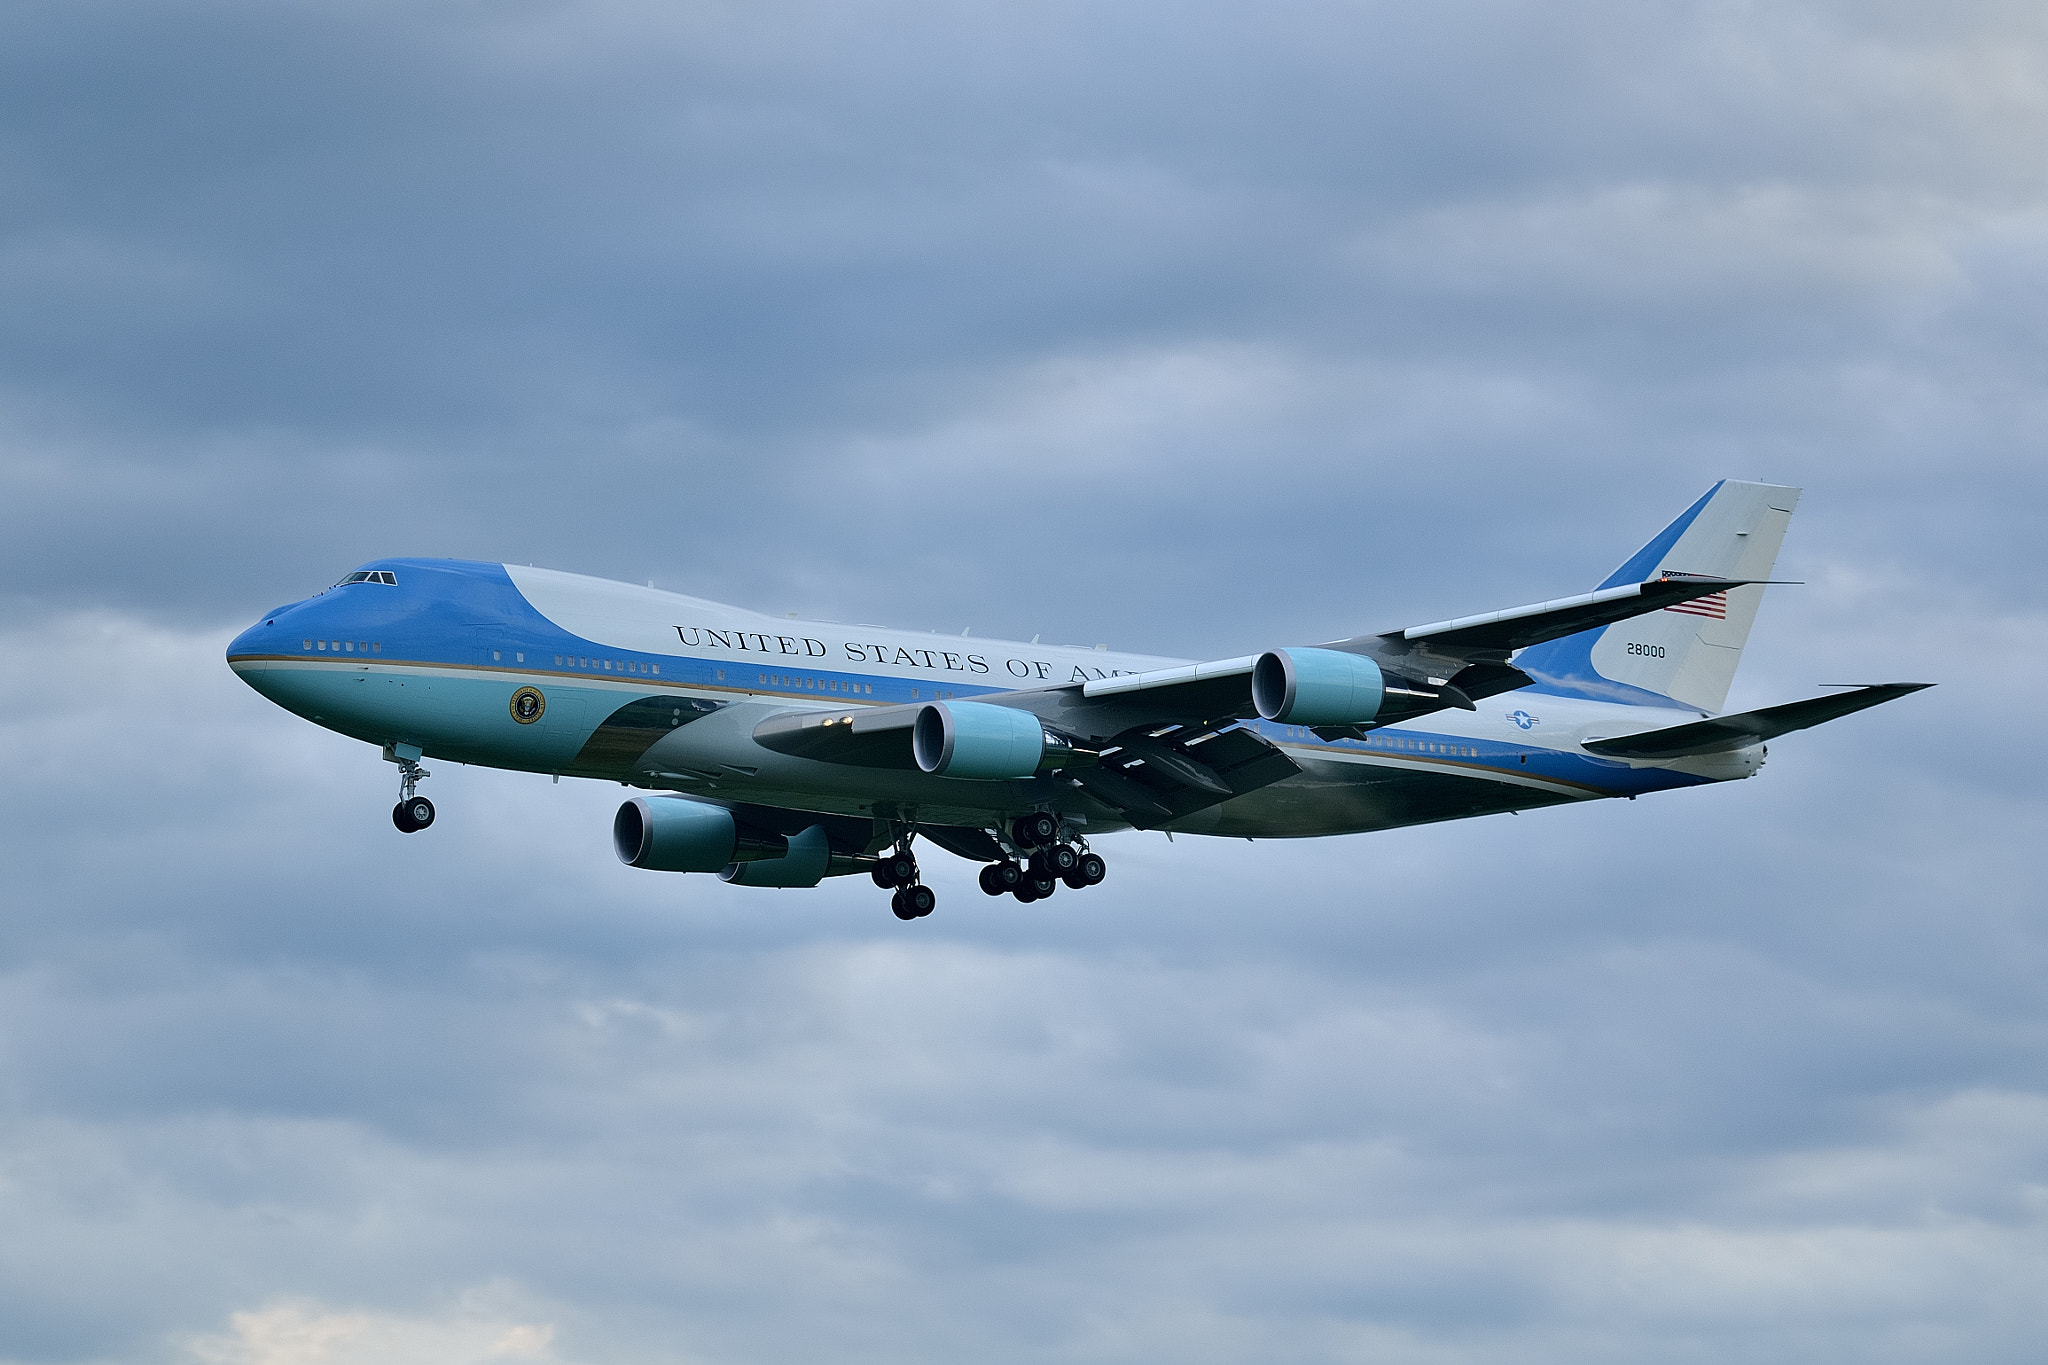 Nikon D7000 sample photo. Air force one - boeing 747-200b photography